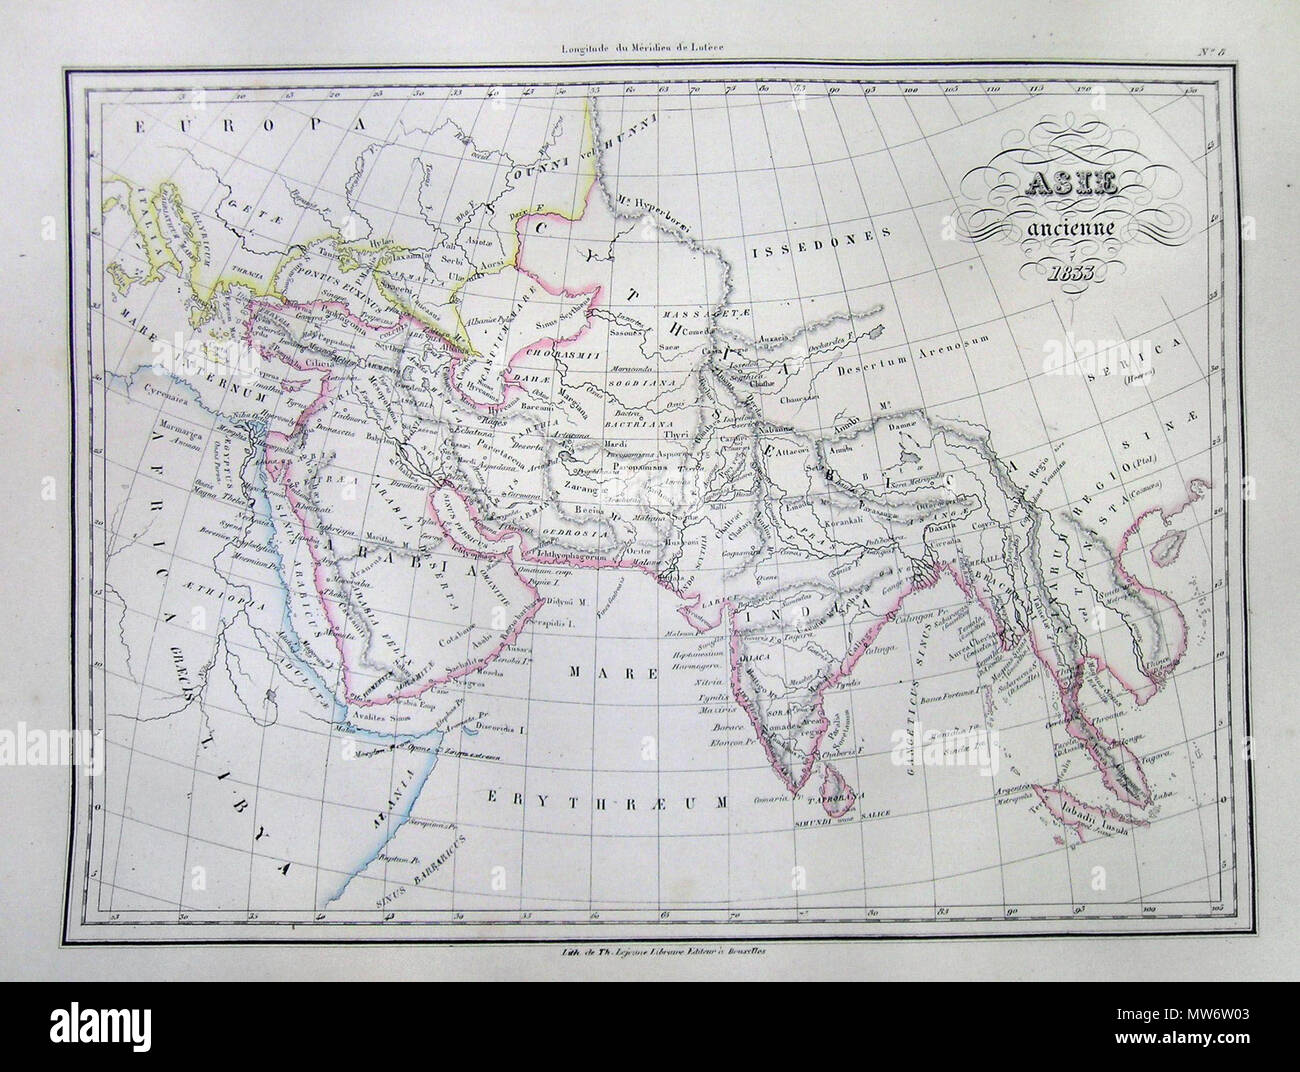 . Asia Ancienne 1833.  English: This beautiful 1833 hand colored map depicts Asia in Ancient times. Extends only as far as modern day Vietnam and does not include China. All text is in French. . 1833  7 1833 Malte-Brun Map of Asia in Ancient Times - Geographicus - AsiaAncient-mb-1837 Stock Photo